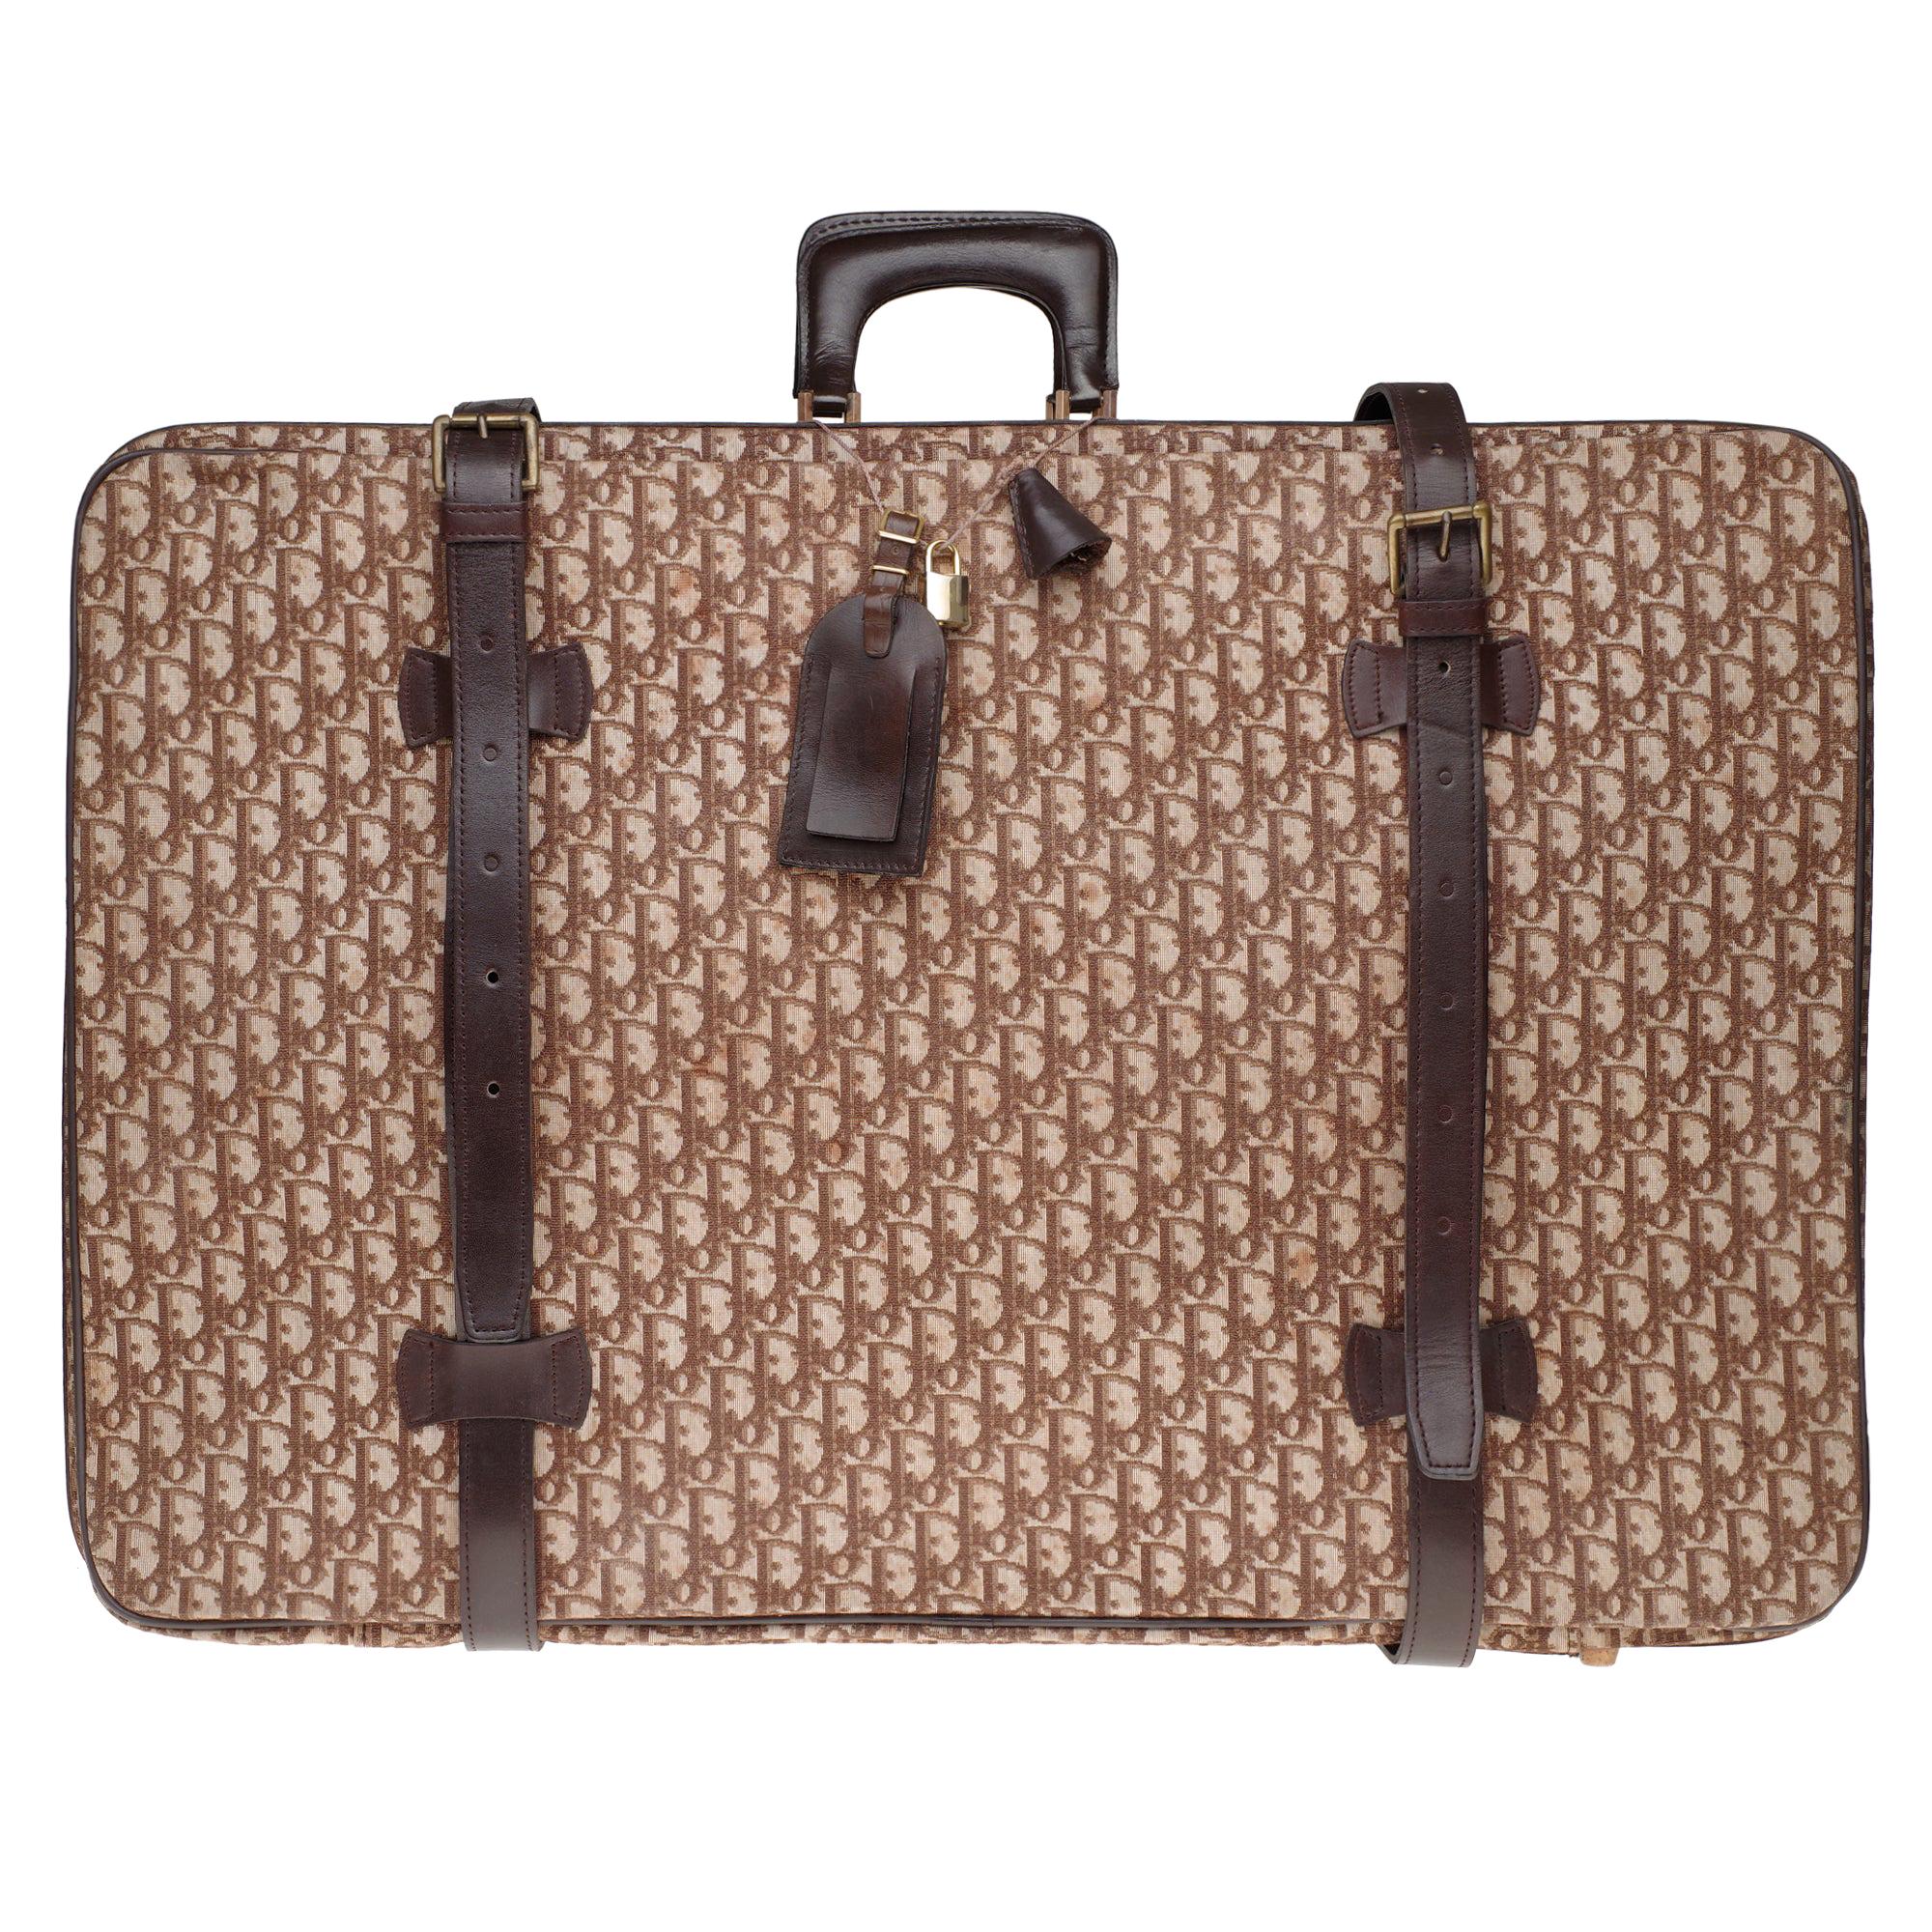 Beautiful vintage Christian Dior suitcase in brown monogram canvas and leather